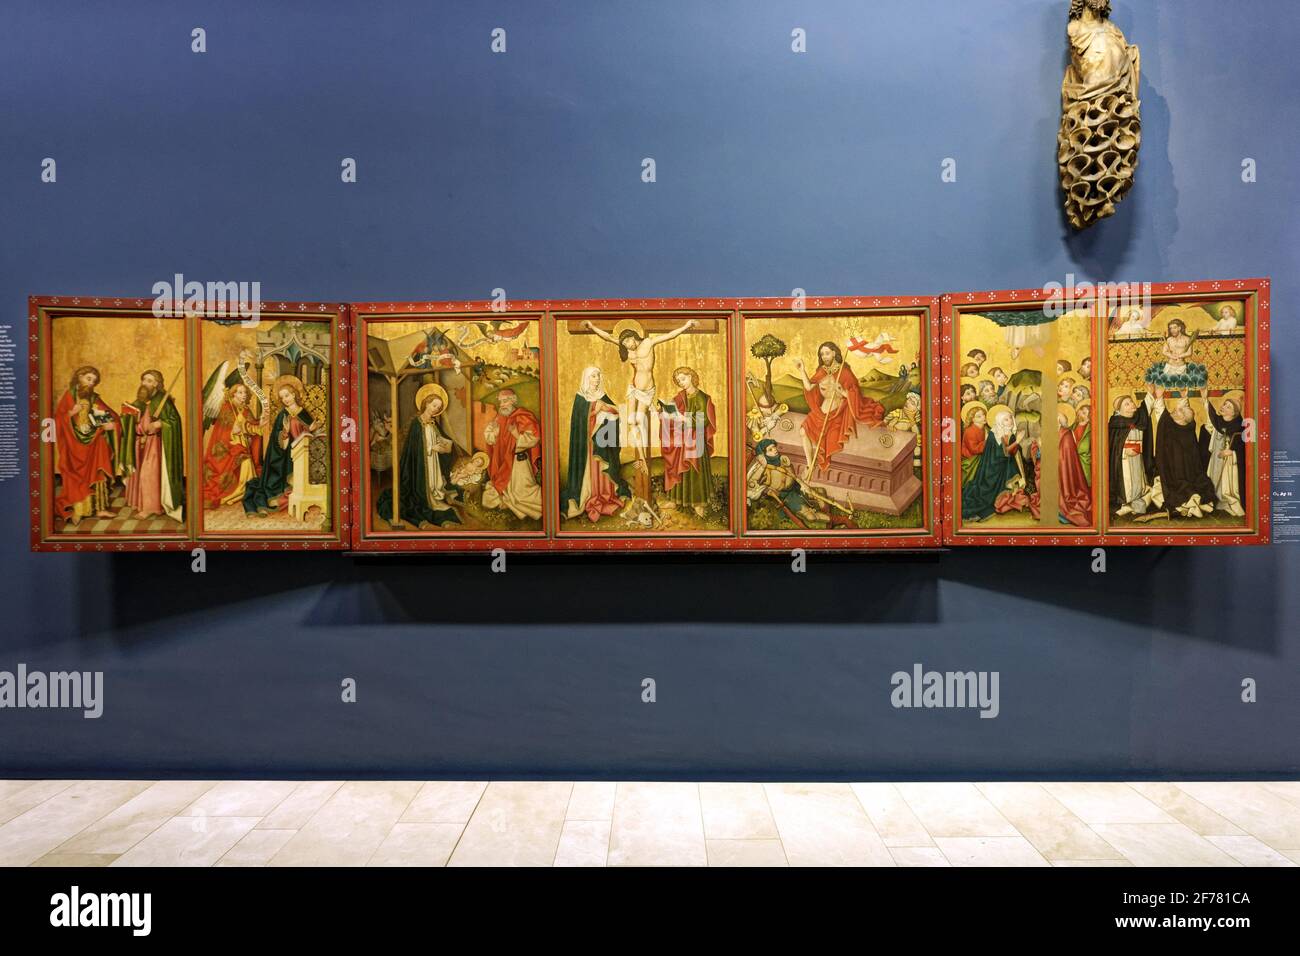 Germany, Baden Wurttemberg, Freiburg im Breisgau, Augustinermuseum, Altarpiece with scenes from the life of the Virgin and the Passion of Christ, Upper Rhine, c.1450 Stock Photo